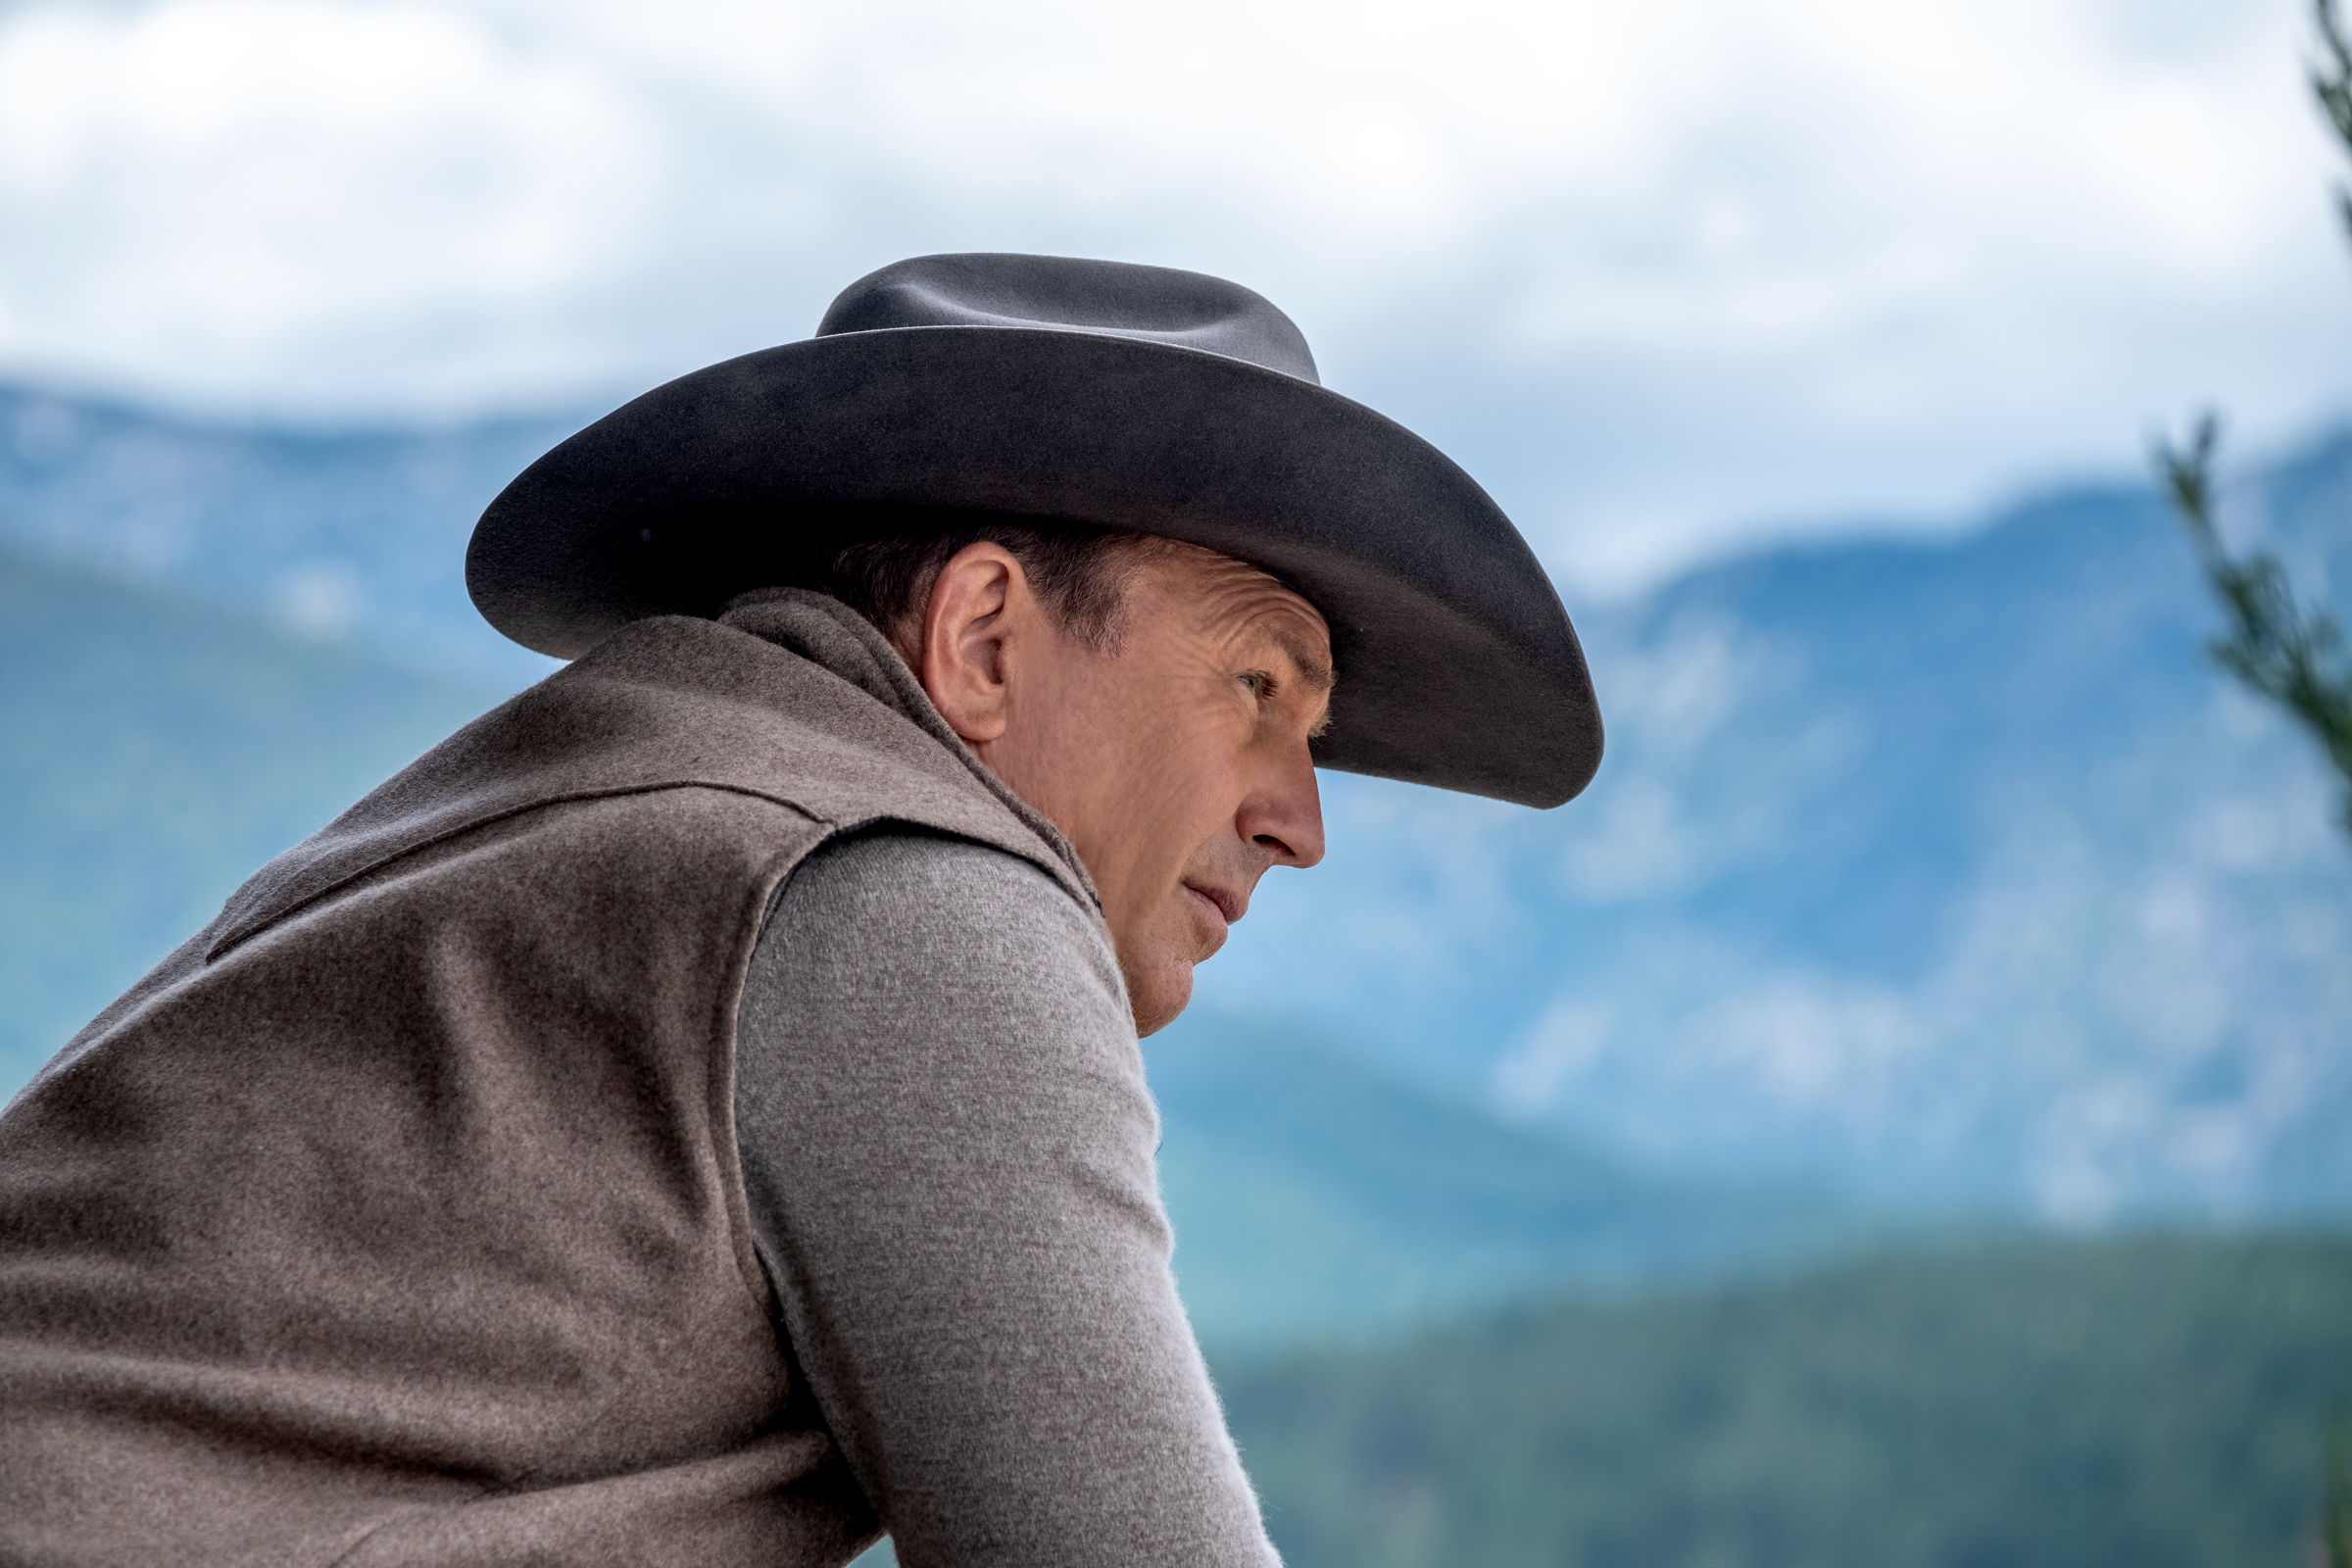 Kevin Costner leans over a fence in Yellowstone.